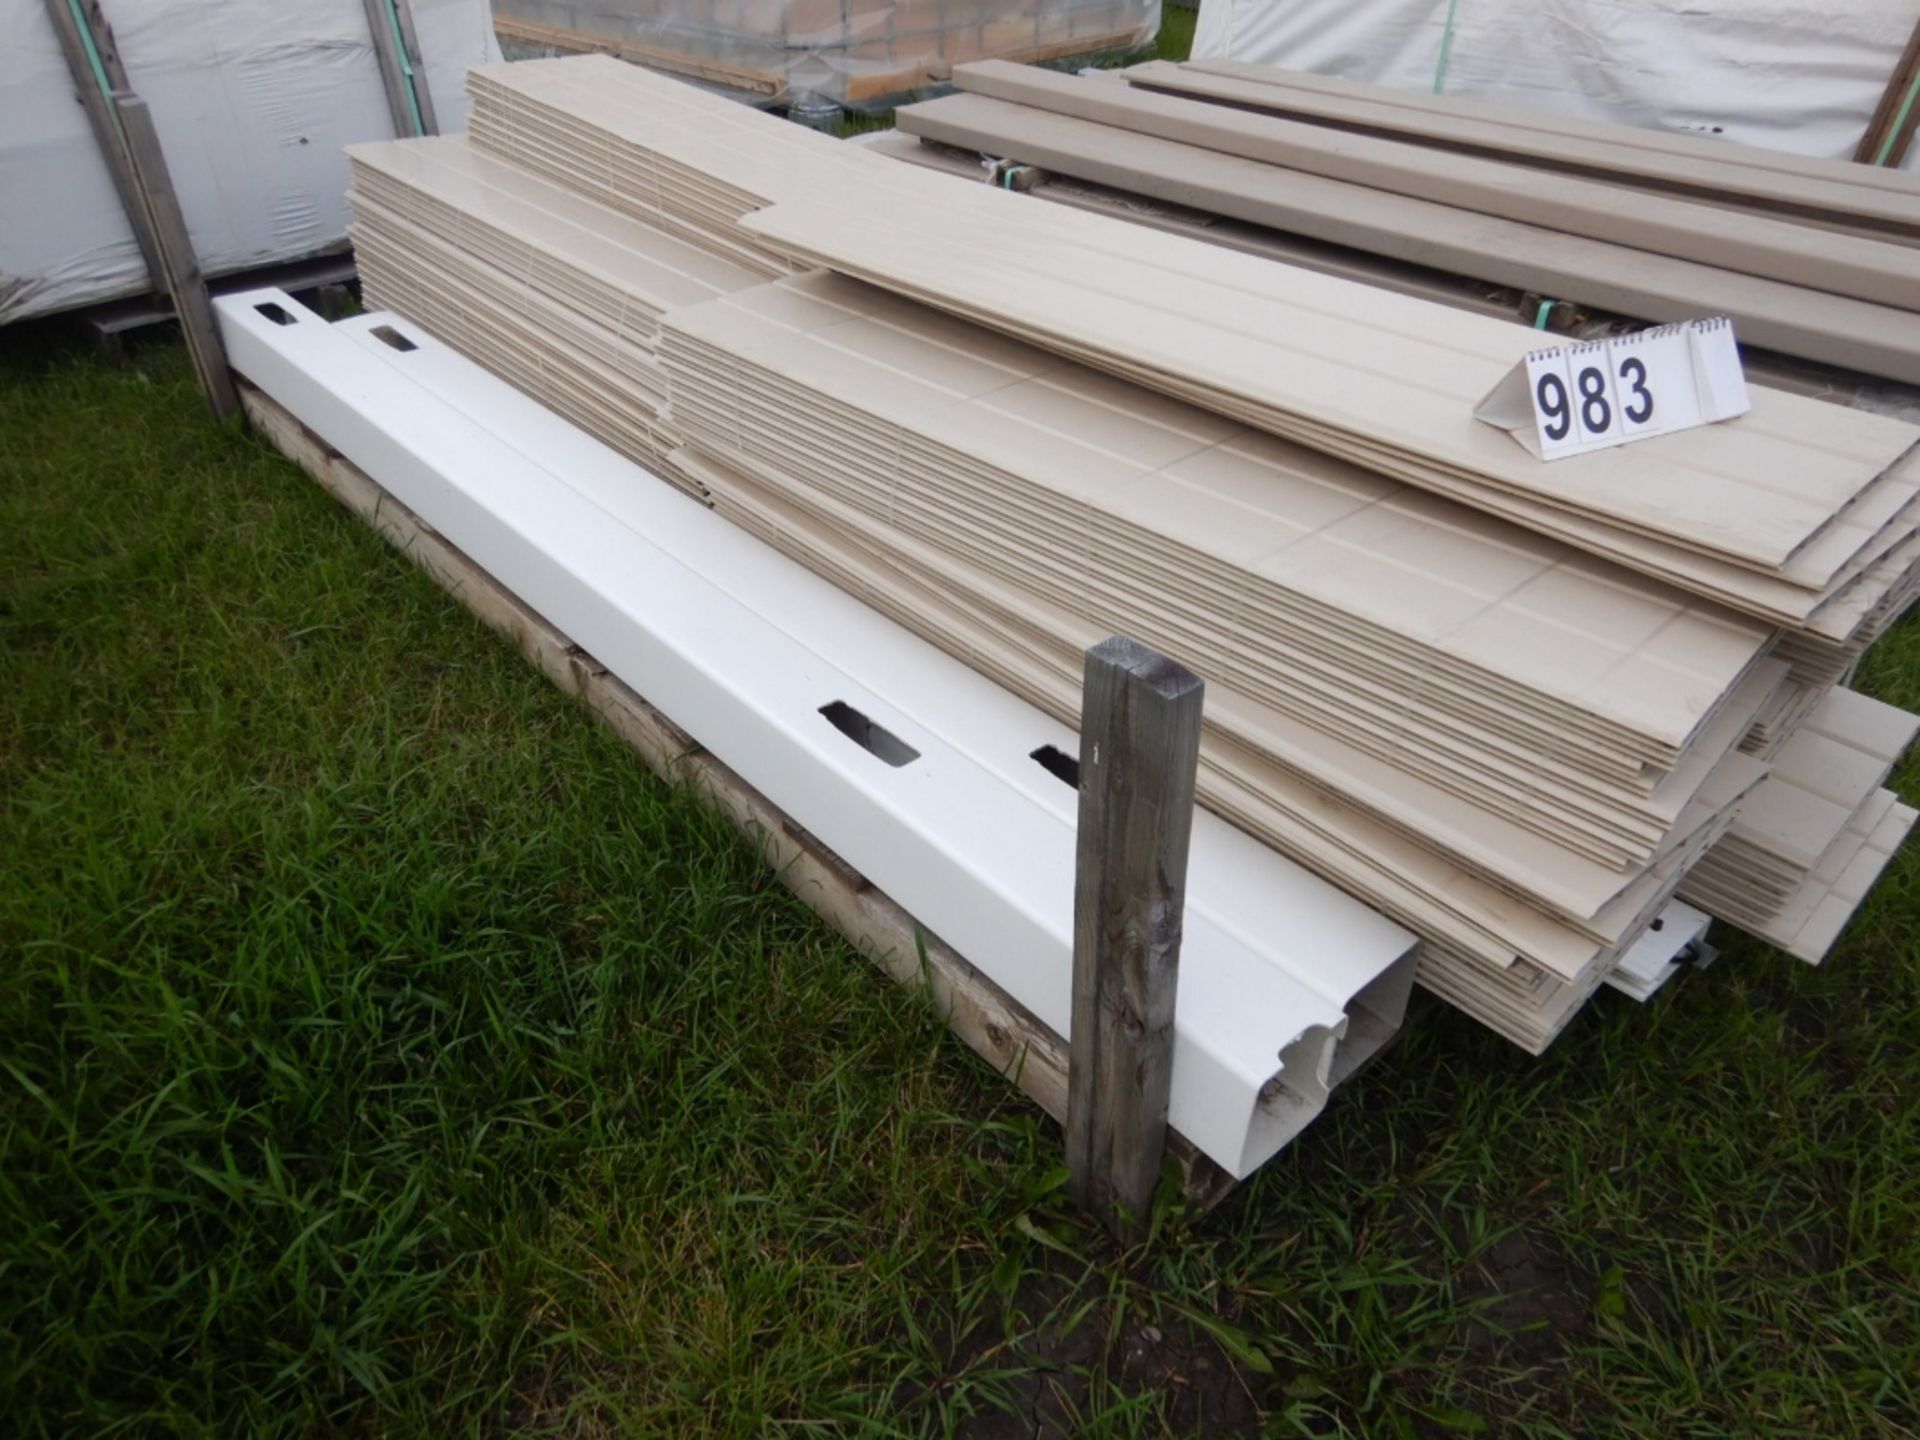 L/O 12"X51 FT PPLY FENCE BOARDS, POLY FENCE POSTS - Image 2 of 2